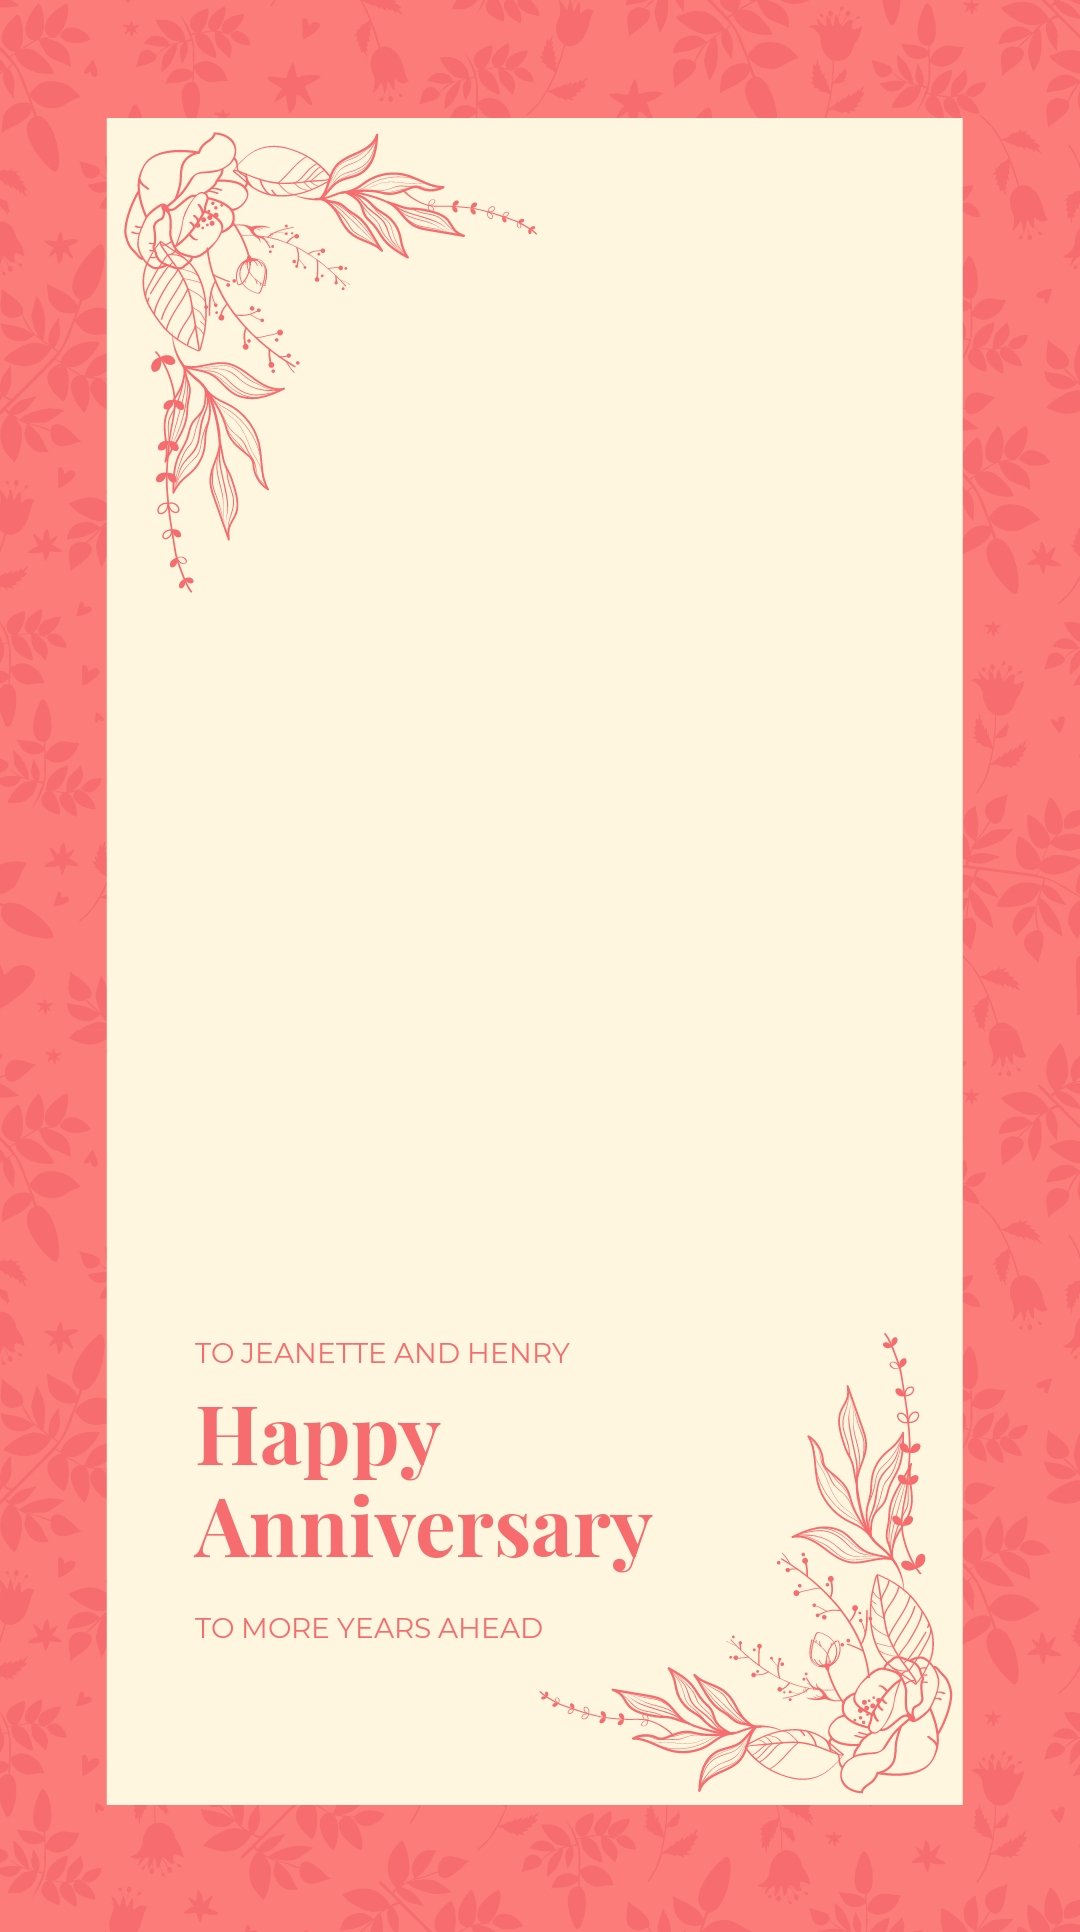 Free Happy Anniversary Snapchat Geofilter Template